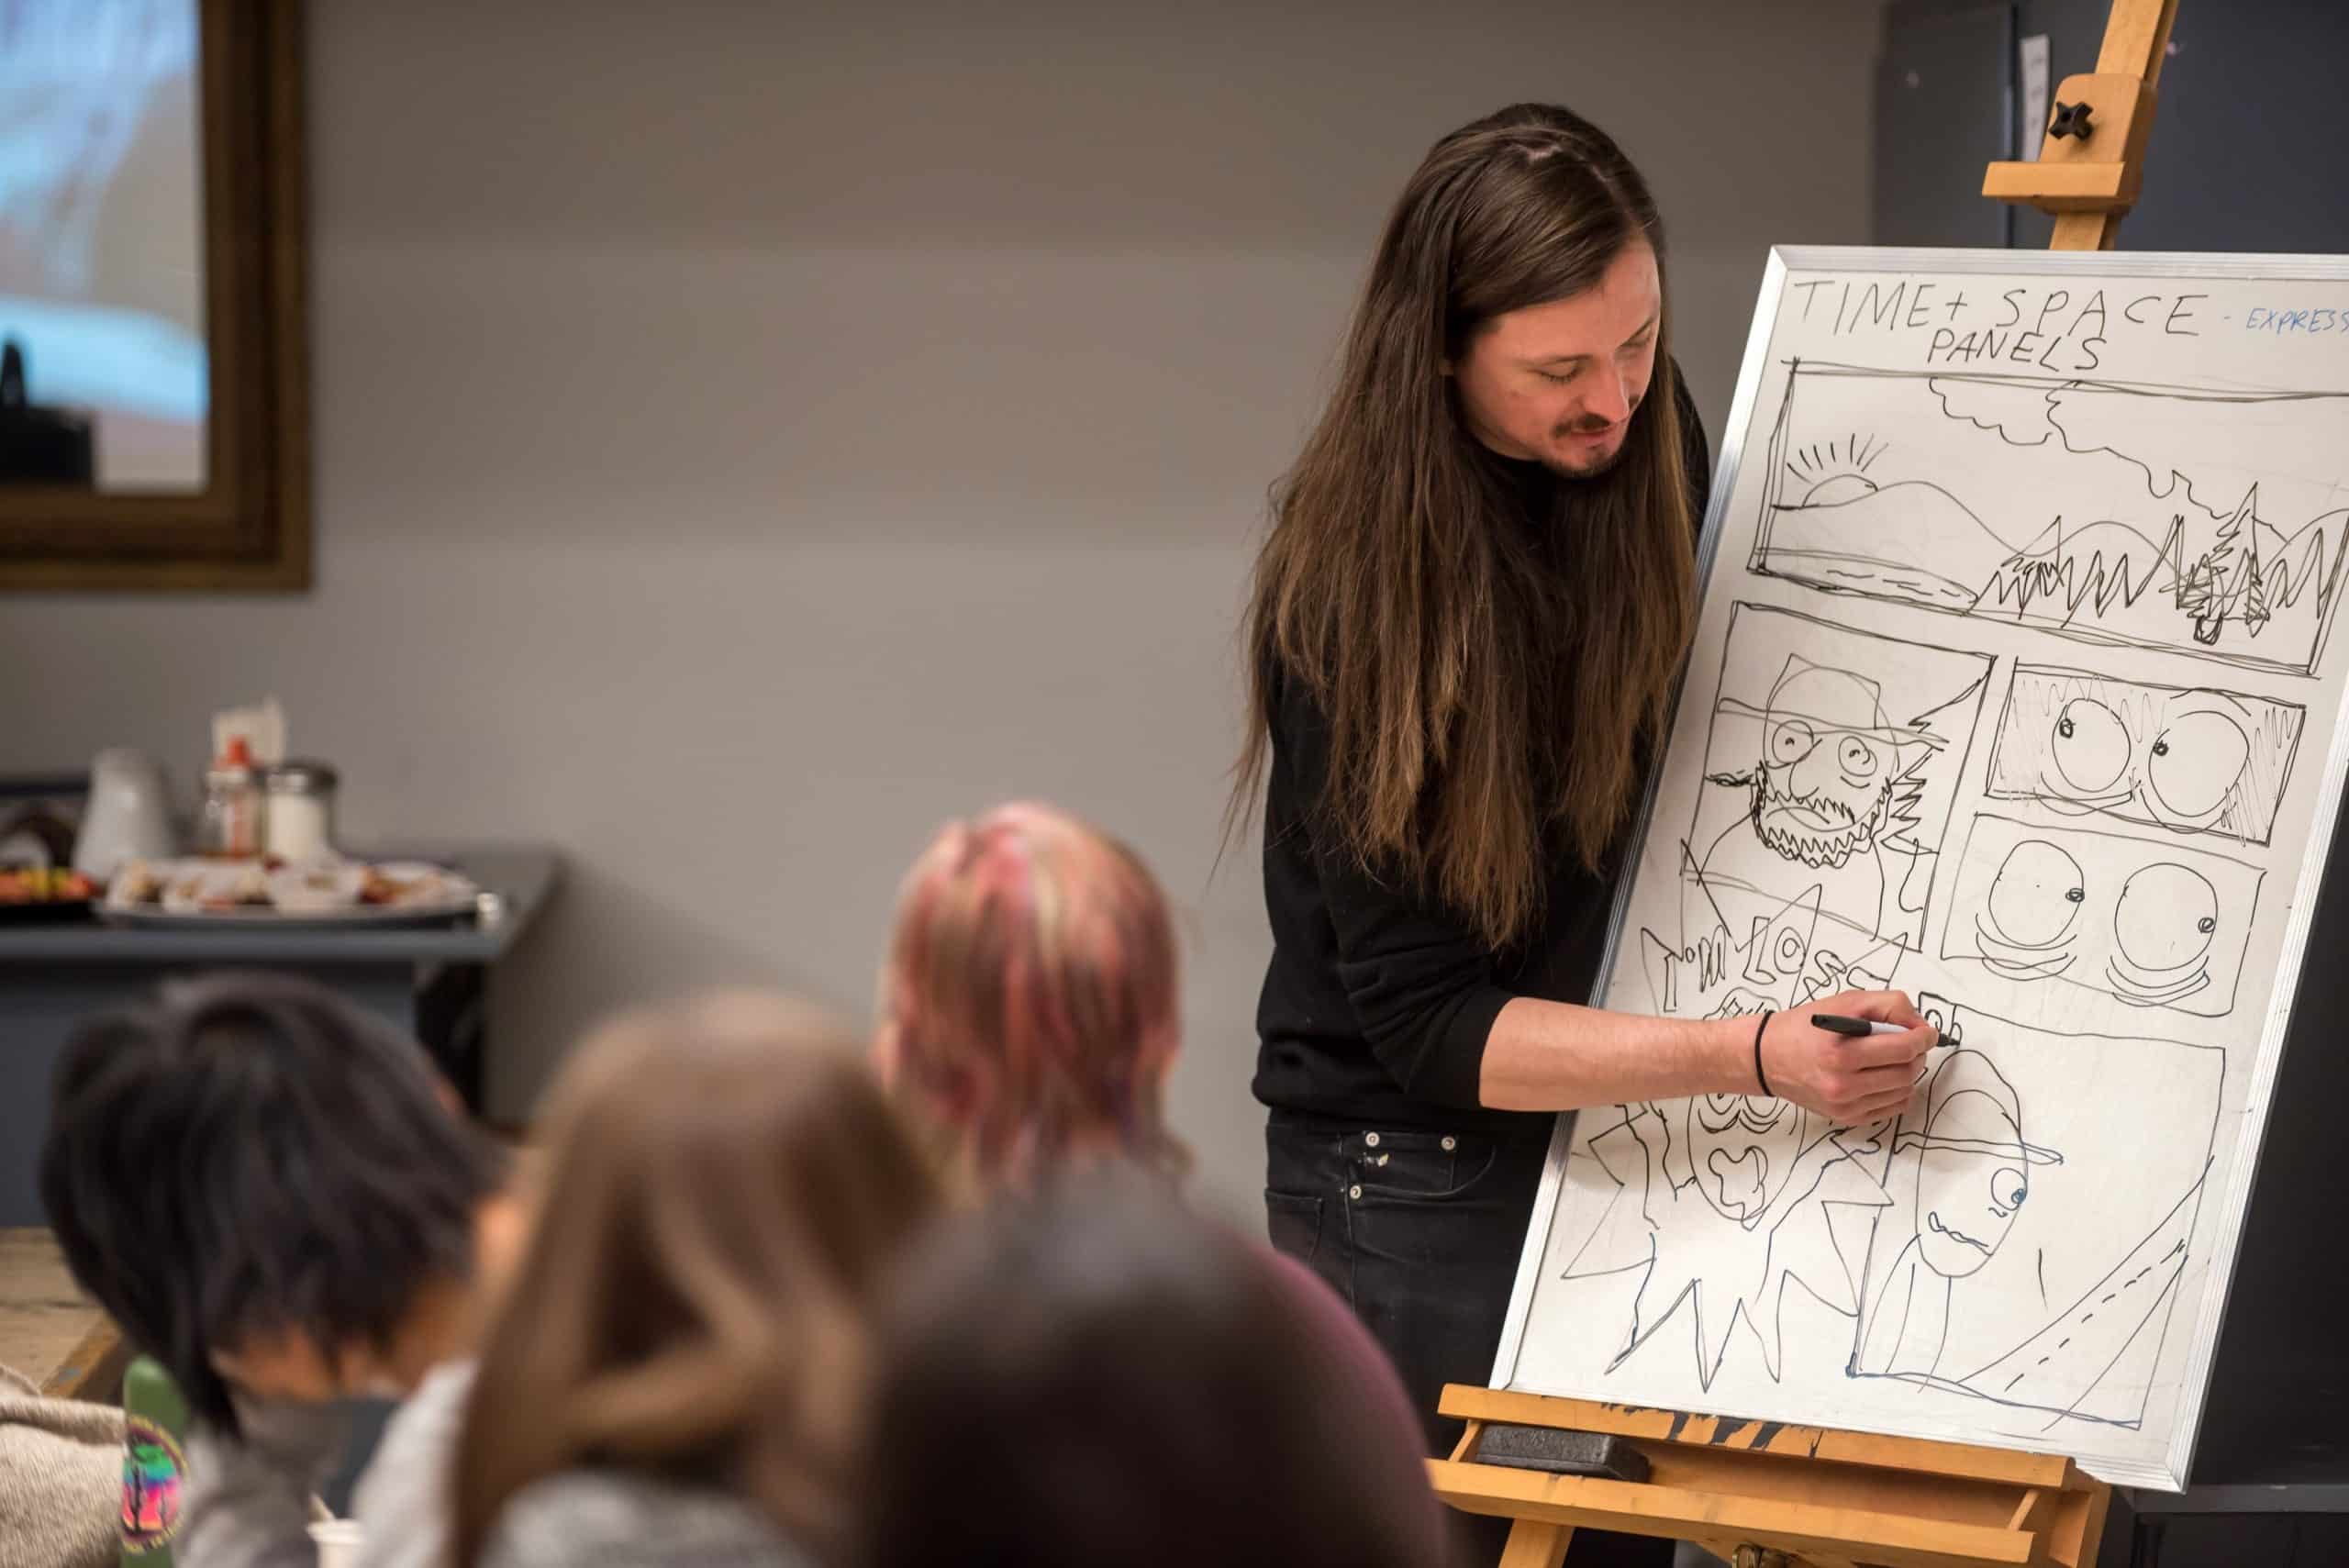 Walter Scott leads an open studio workshop on comic writing and drawing.